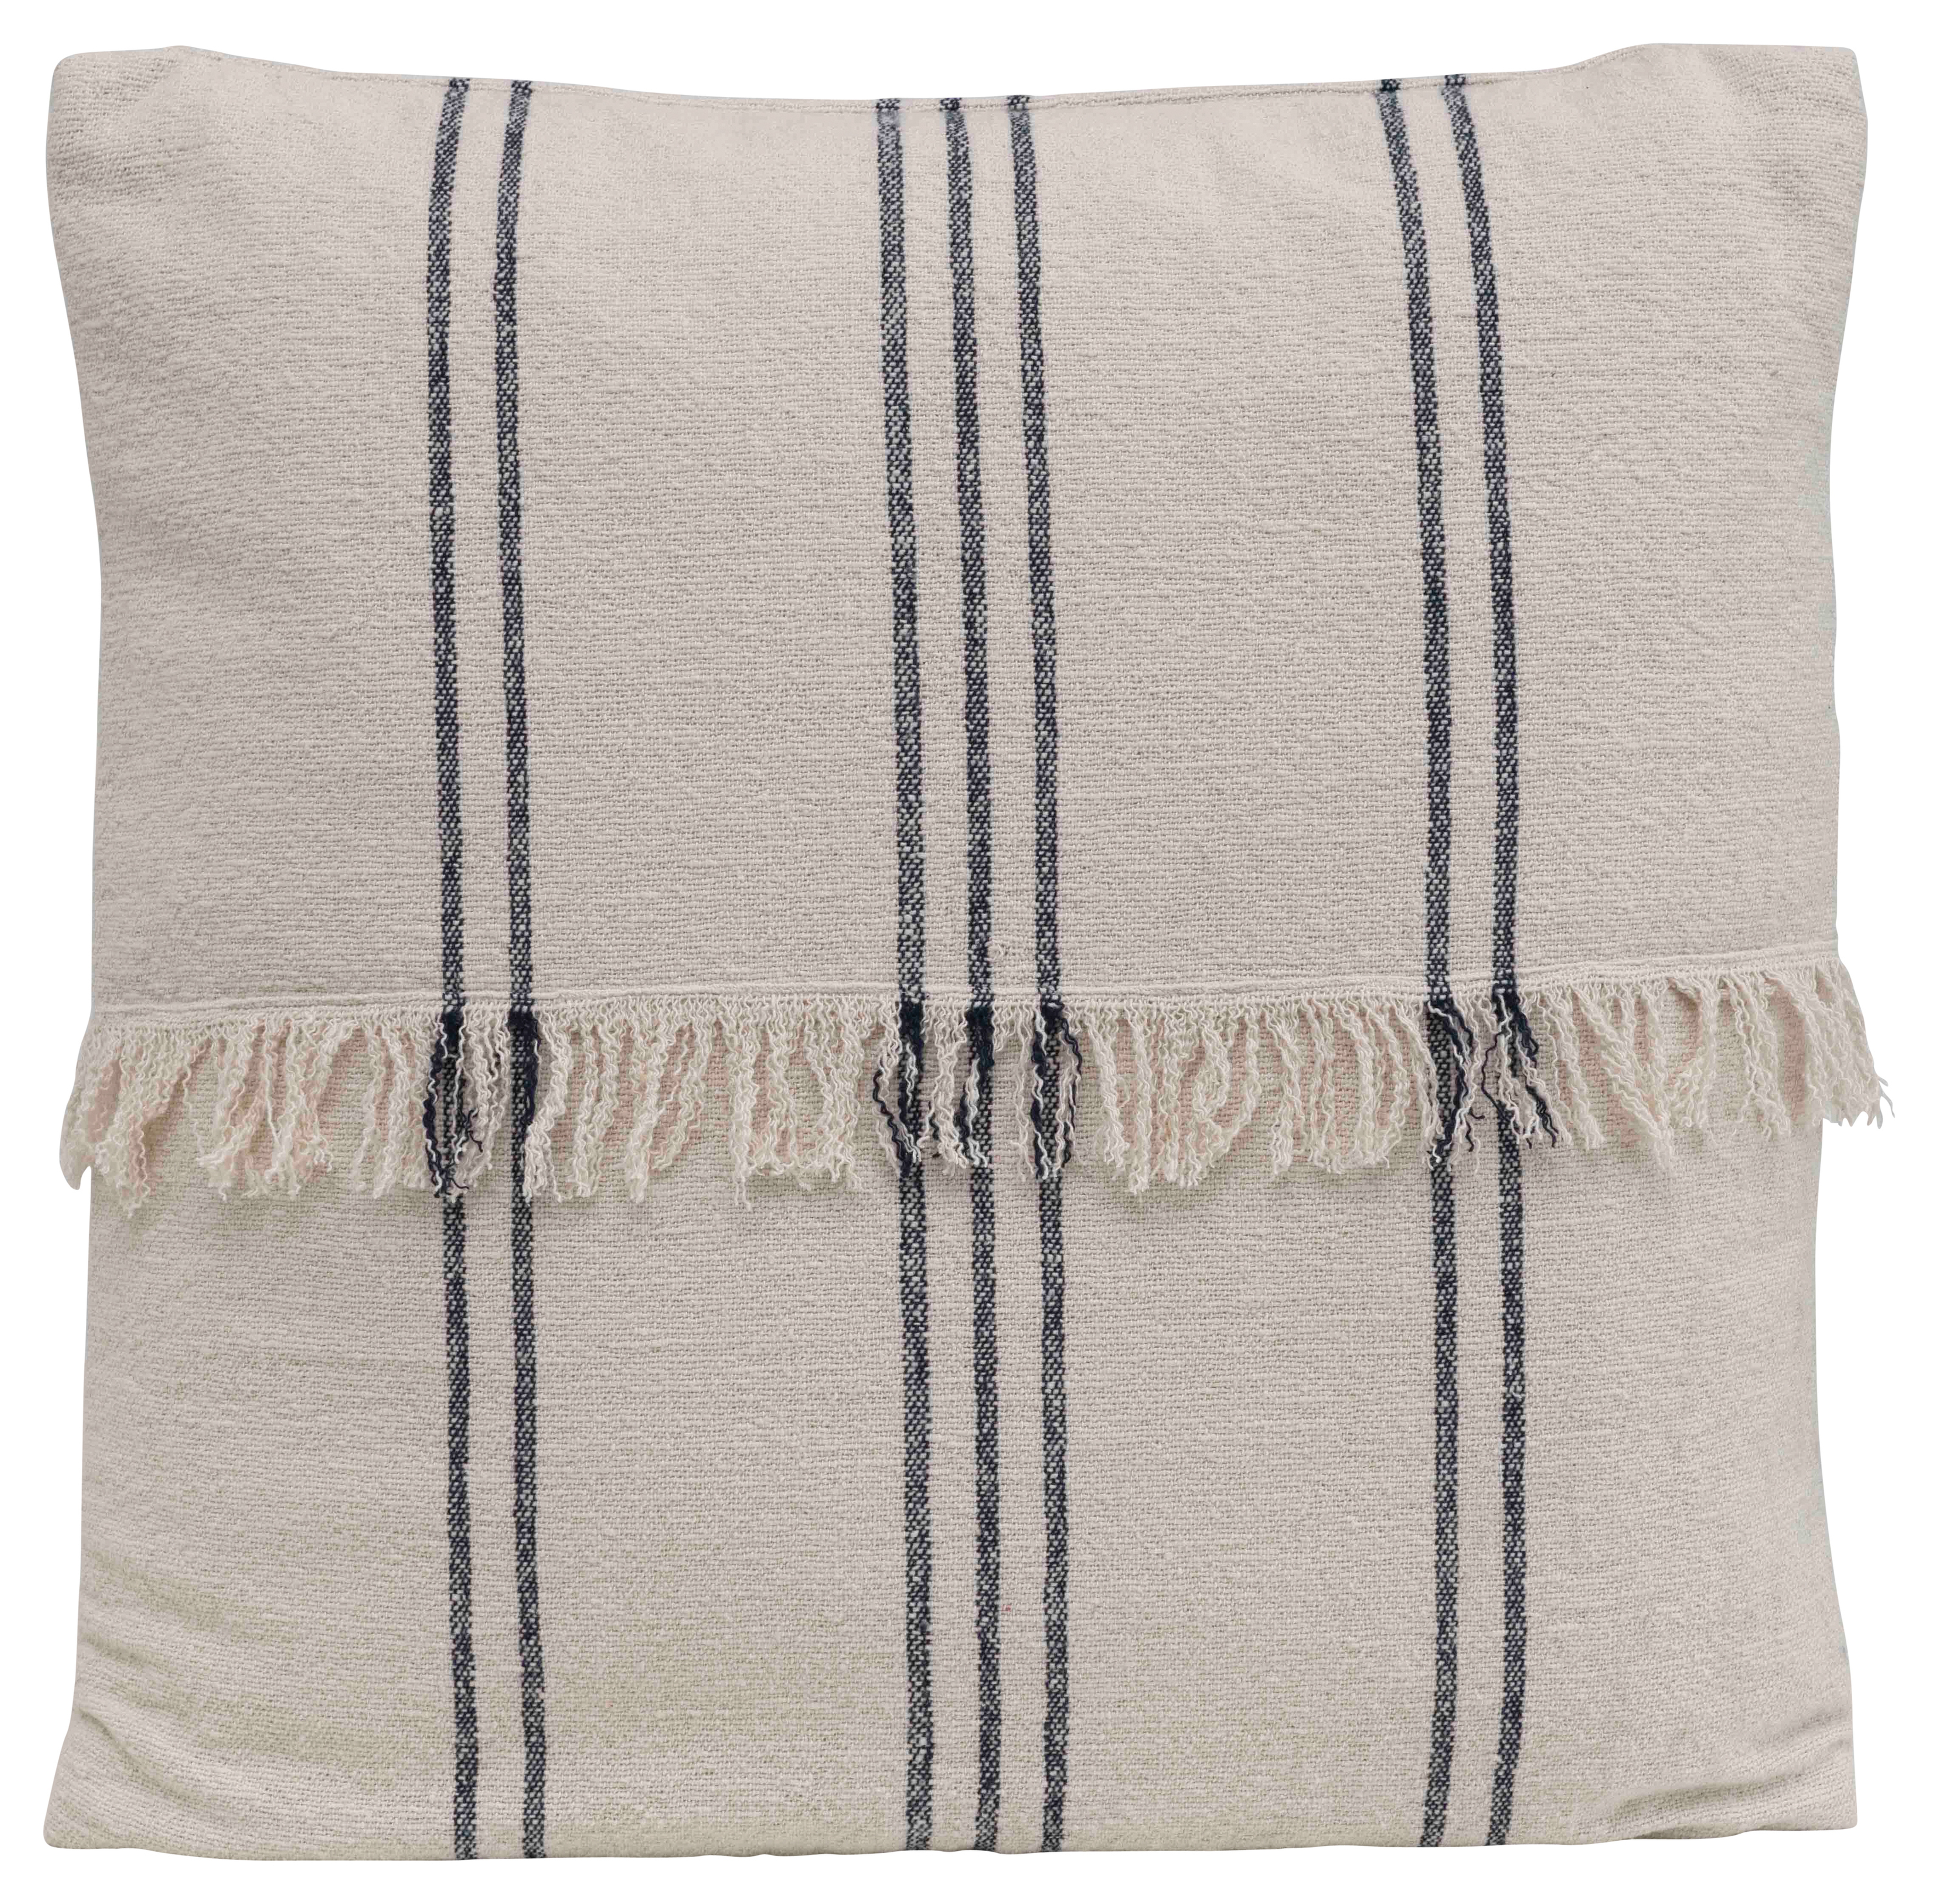 Square Striped Cotton Mudcloth Pillow with Fringe Center - Nomad Home